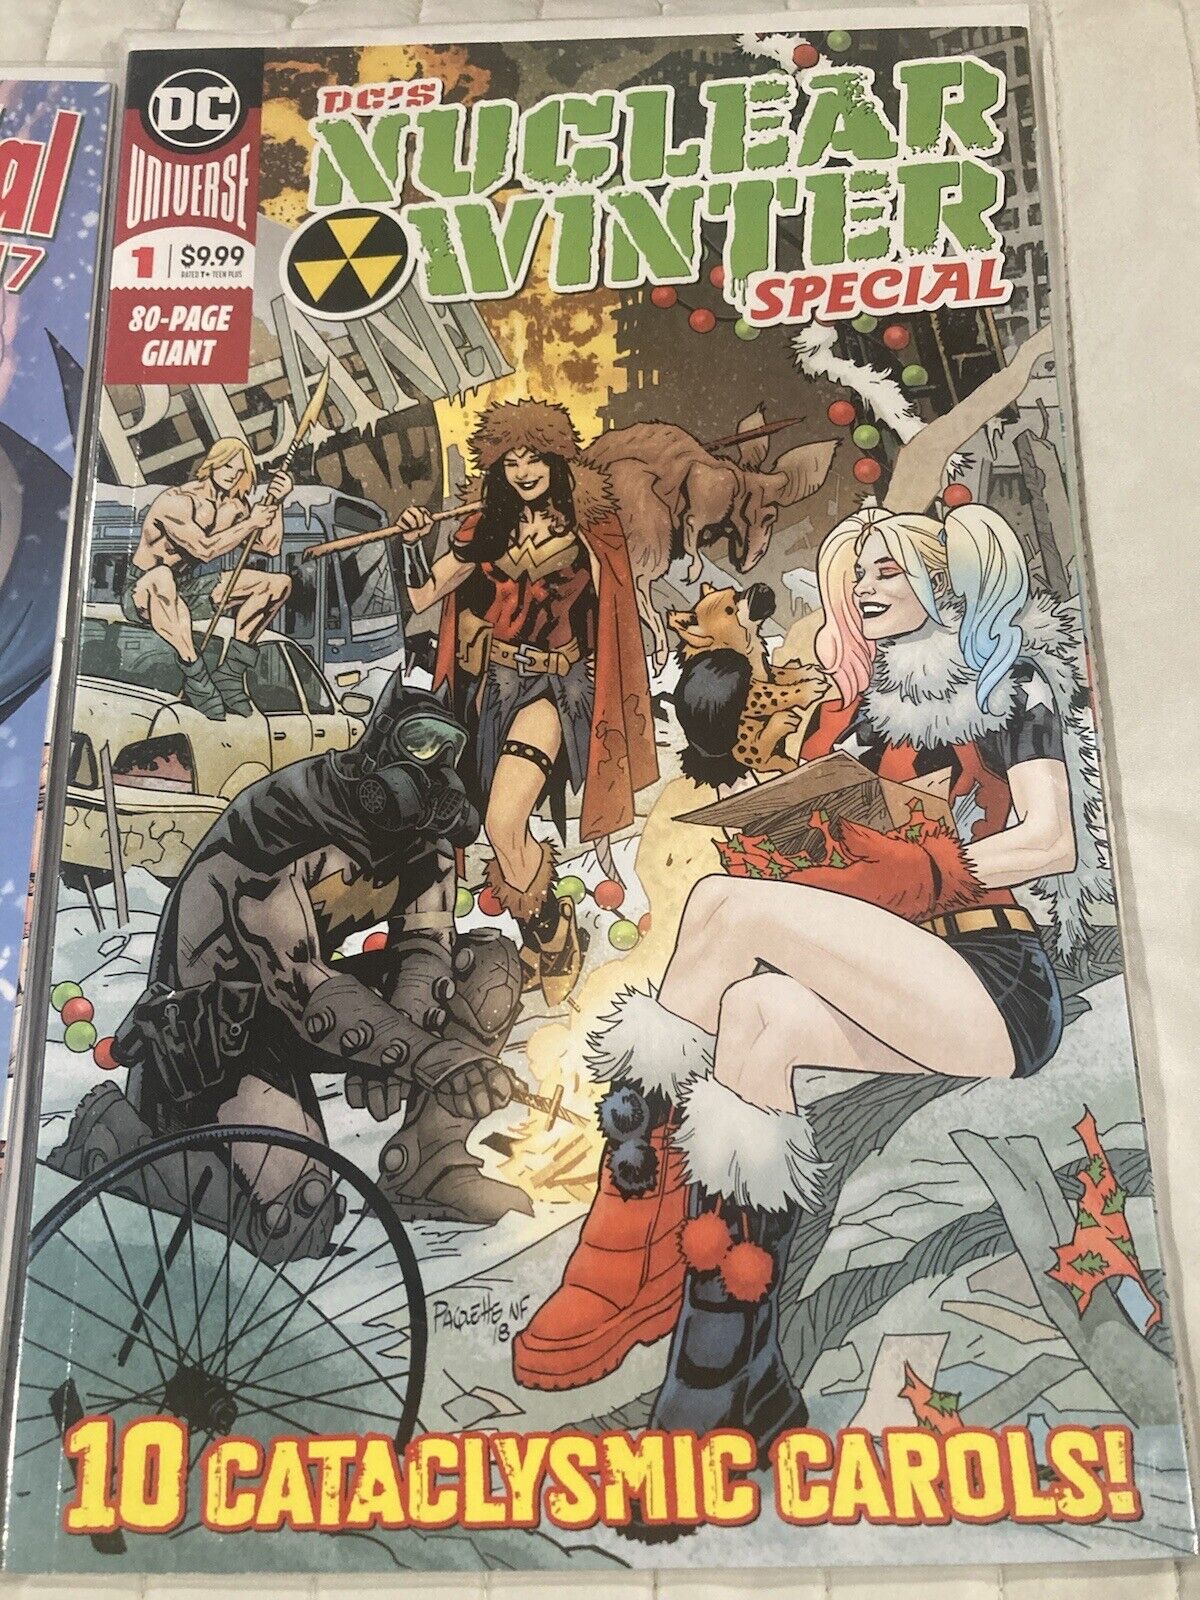 DC Holiday 2017 and Nuclear Winter Special